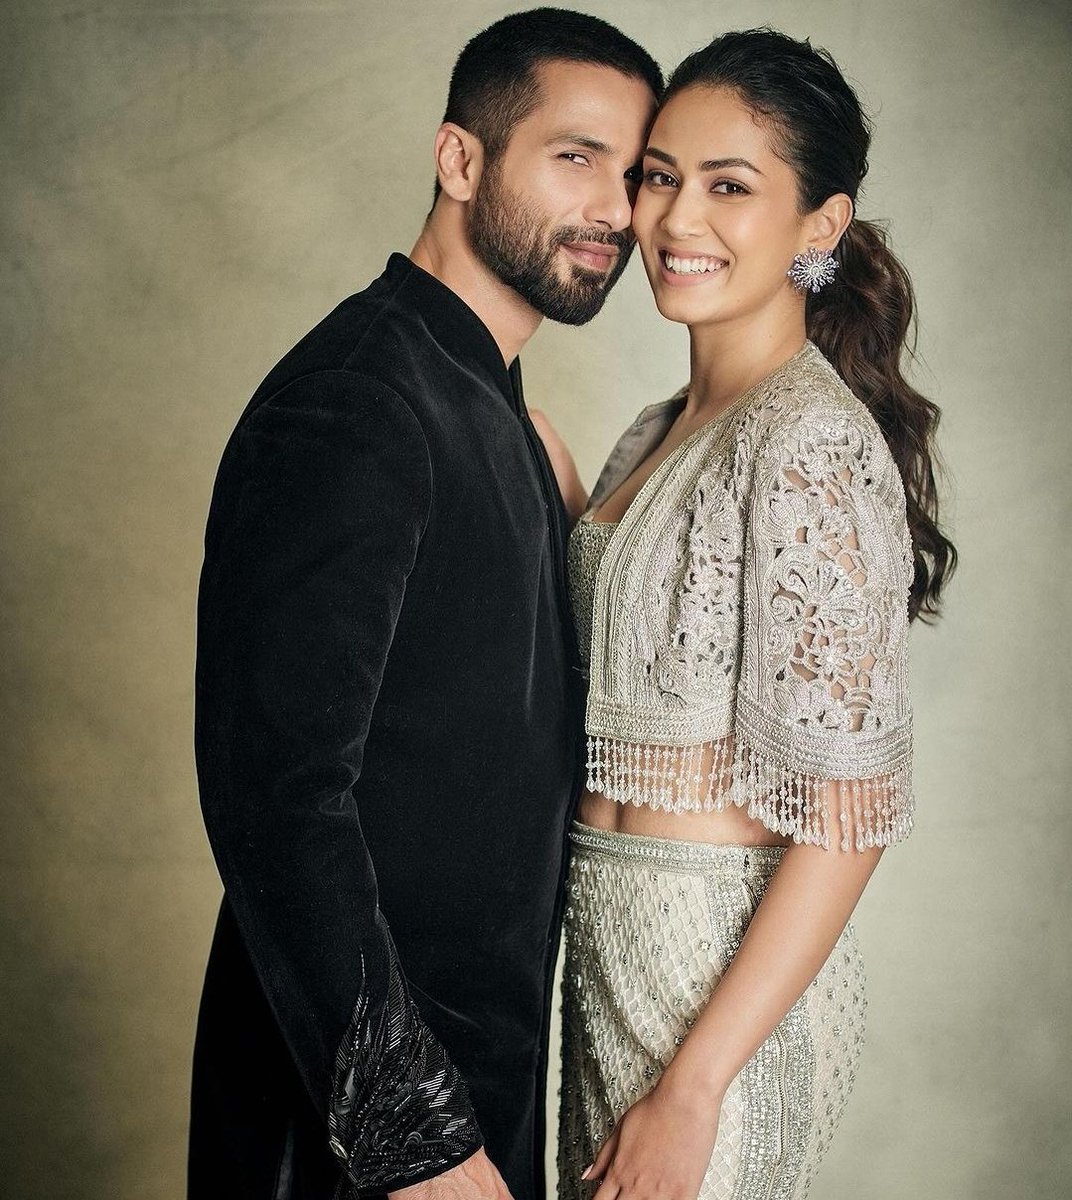 These two!❤️

#ShahidKapoor and #MiraKapoor are here to bless feed.